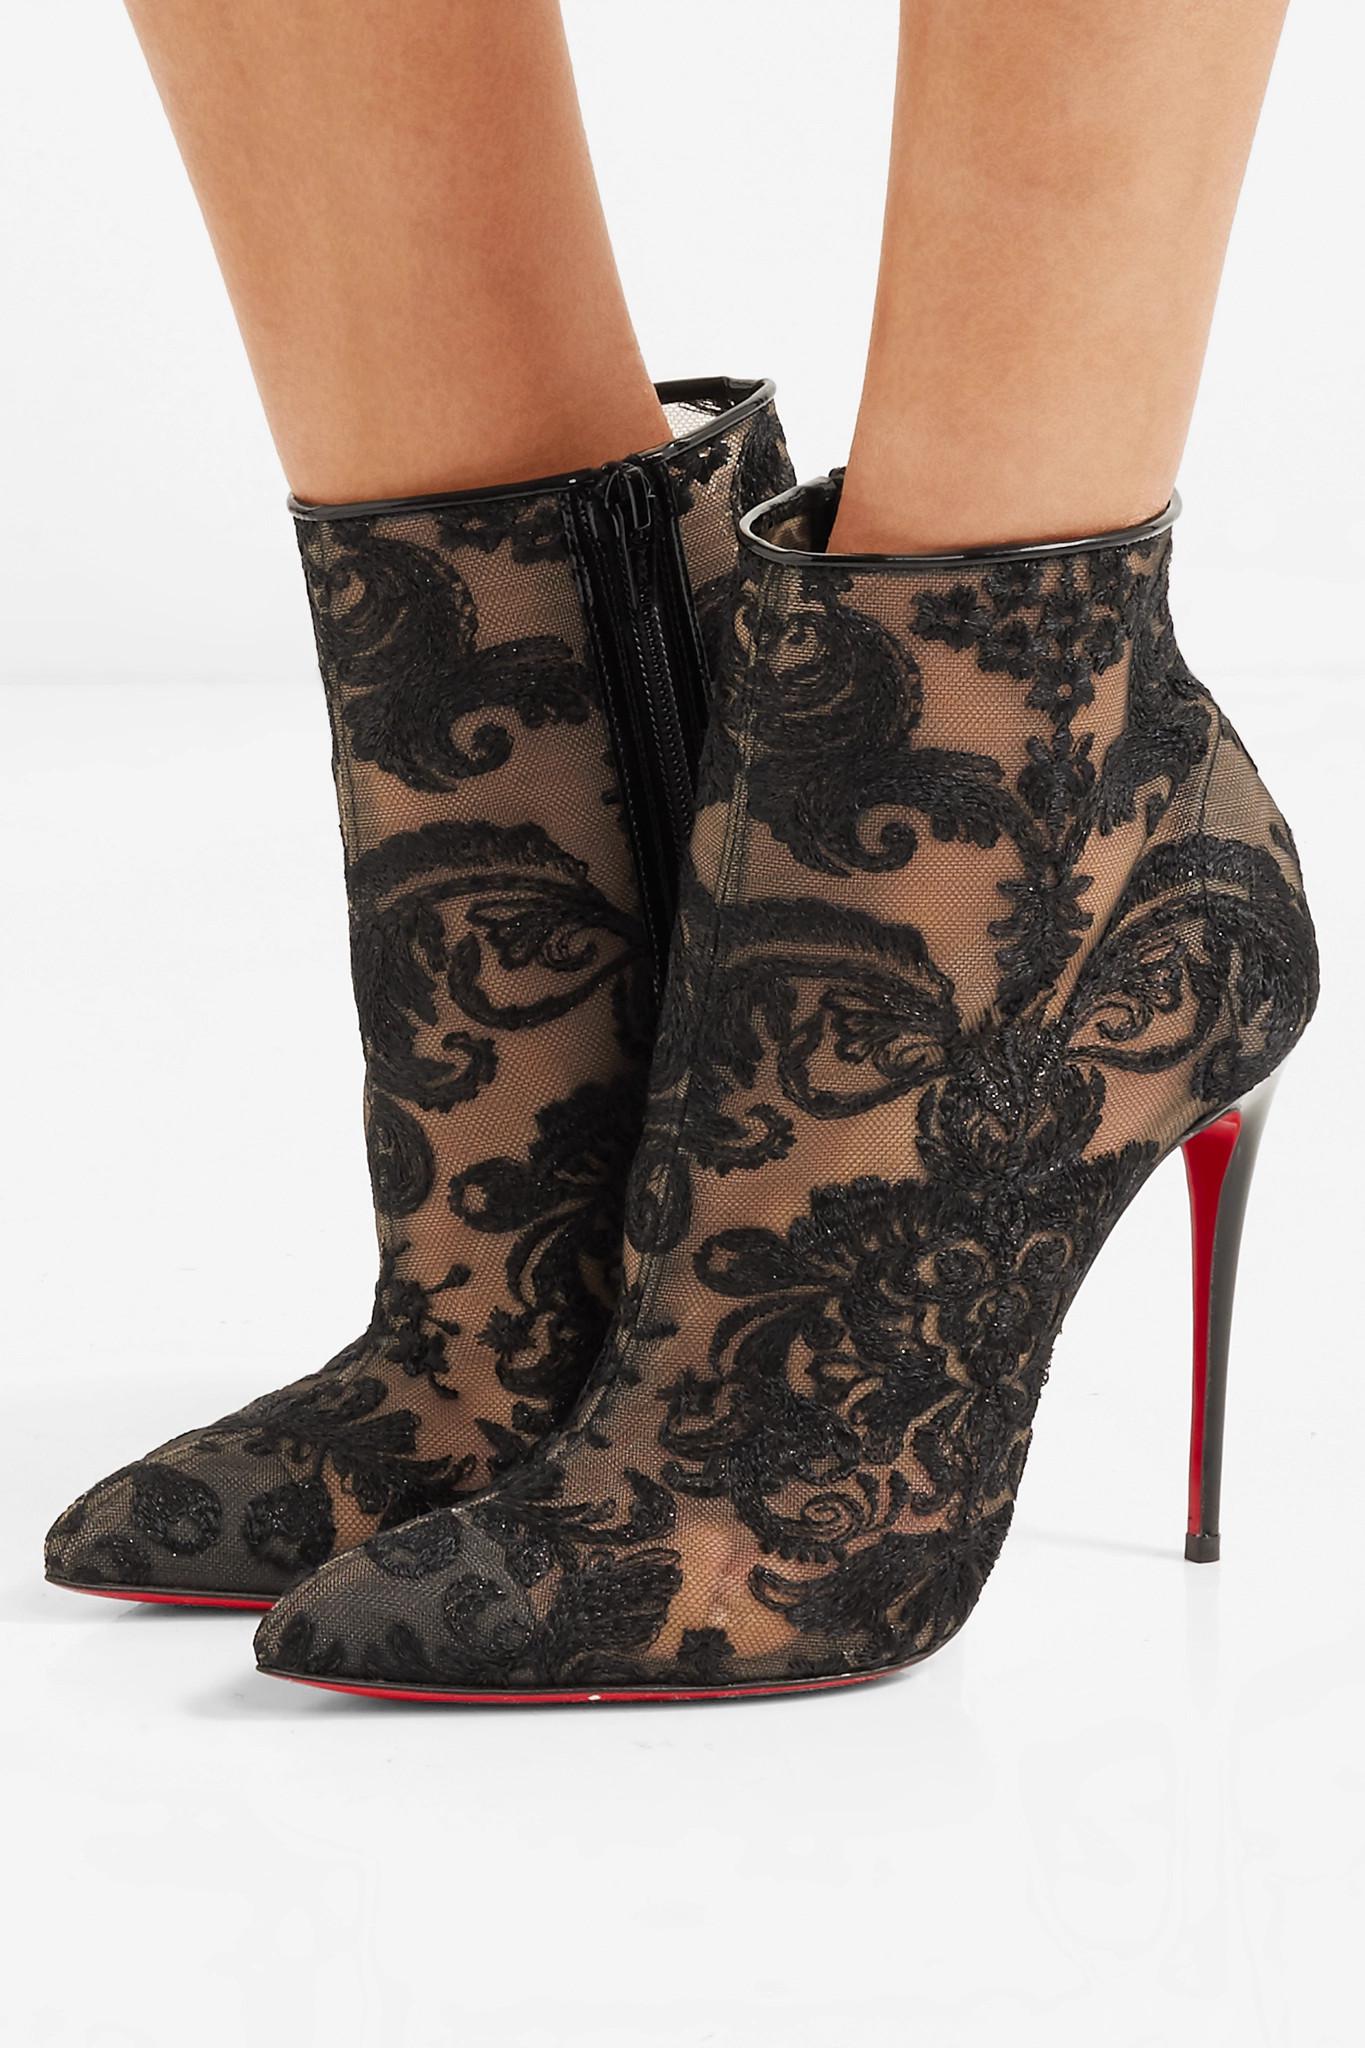 Christian Louboutin Gipsy 100 Guipure Lace Ankle Boots in Black